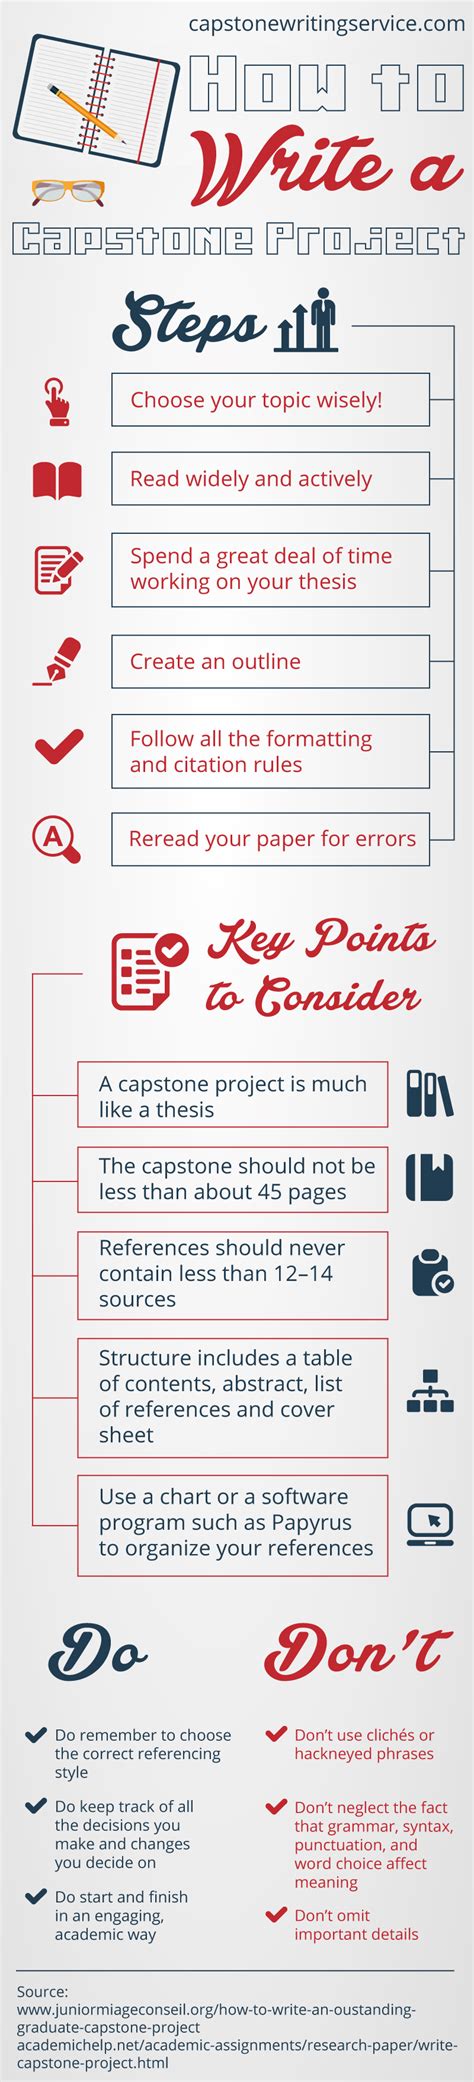 To complete an academic program, students often have to write a capstone paper. Five paragraph essay outline sheet - personalstatements ...